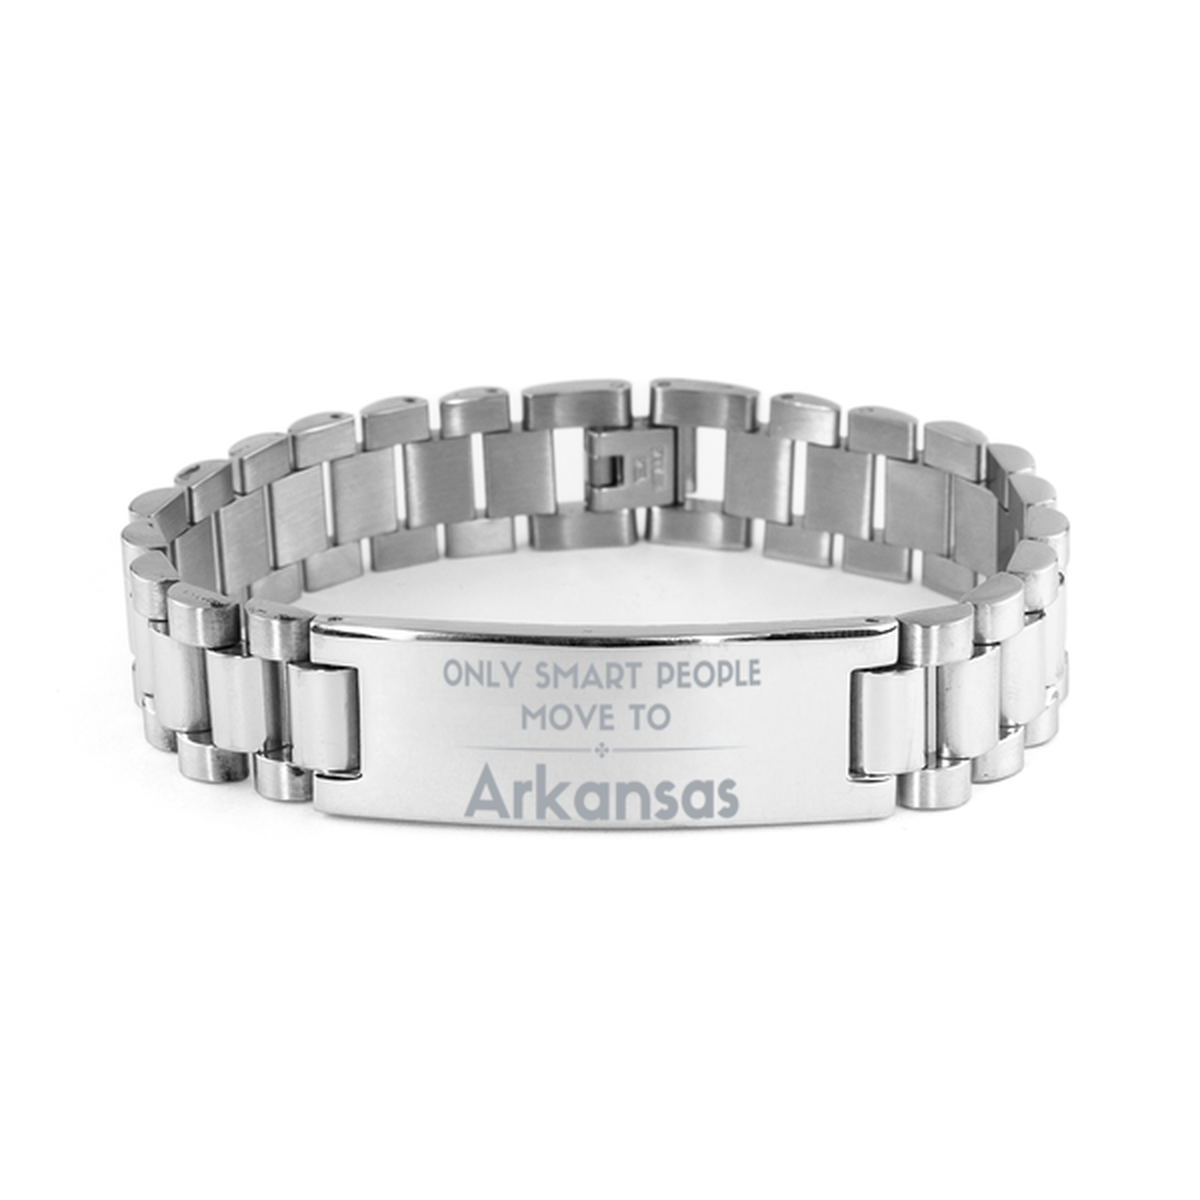 Only smart people move to Arkansas Ladder Stainless Steel Bracelet, Gag Gifts For Arkansas, Move to Arkansas Gifts for Friends Coworker Funny Saying Quote